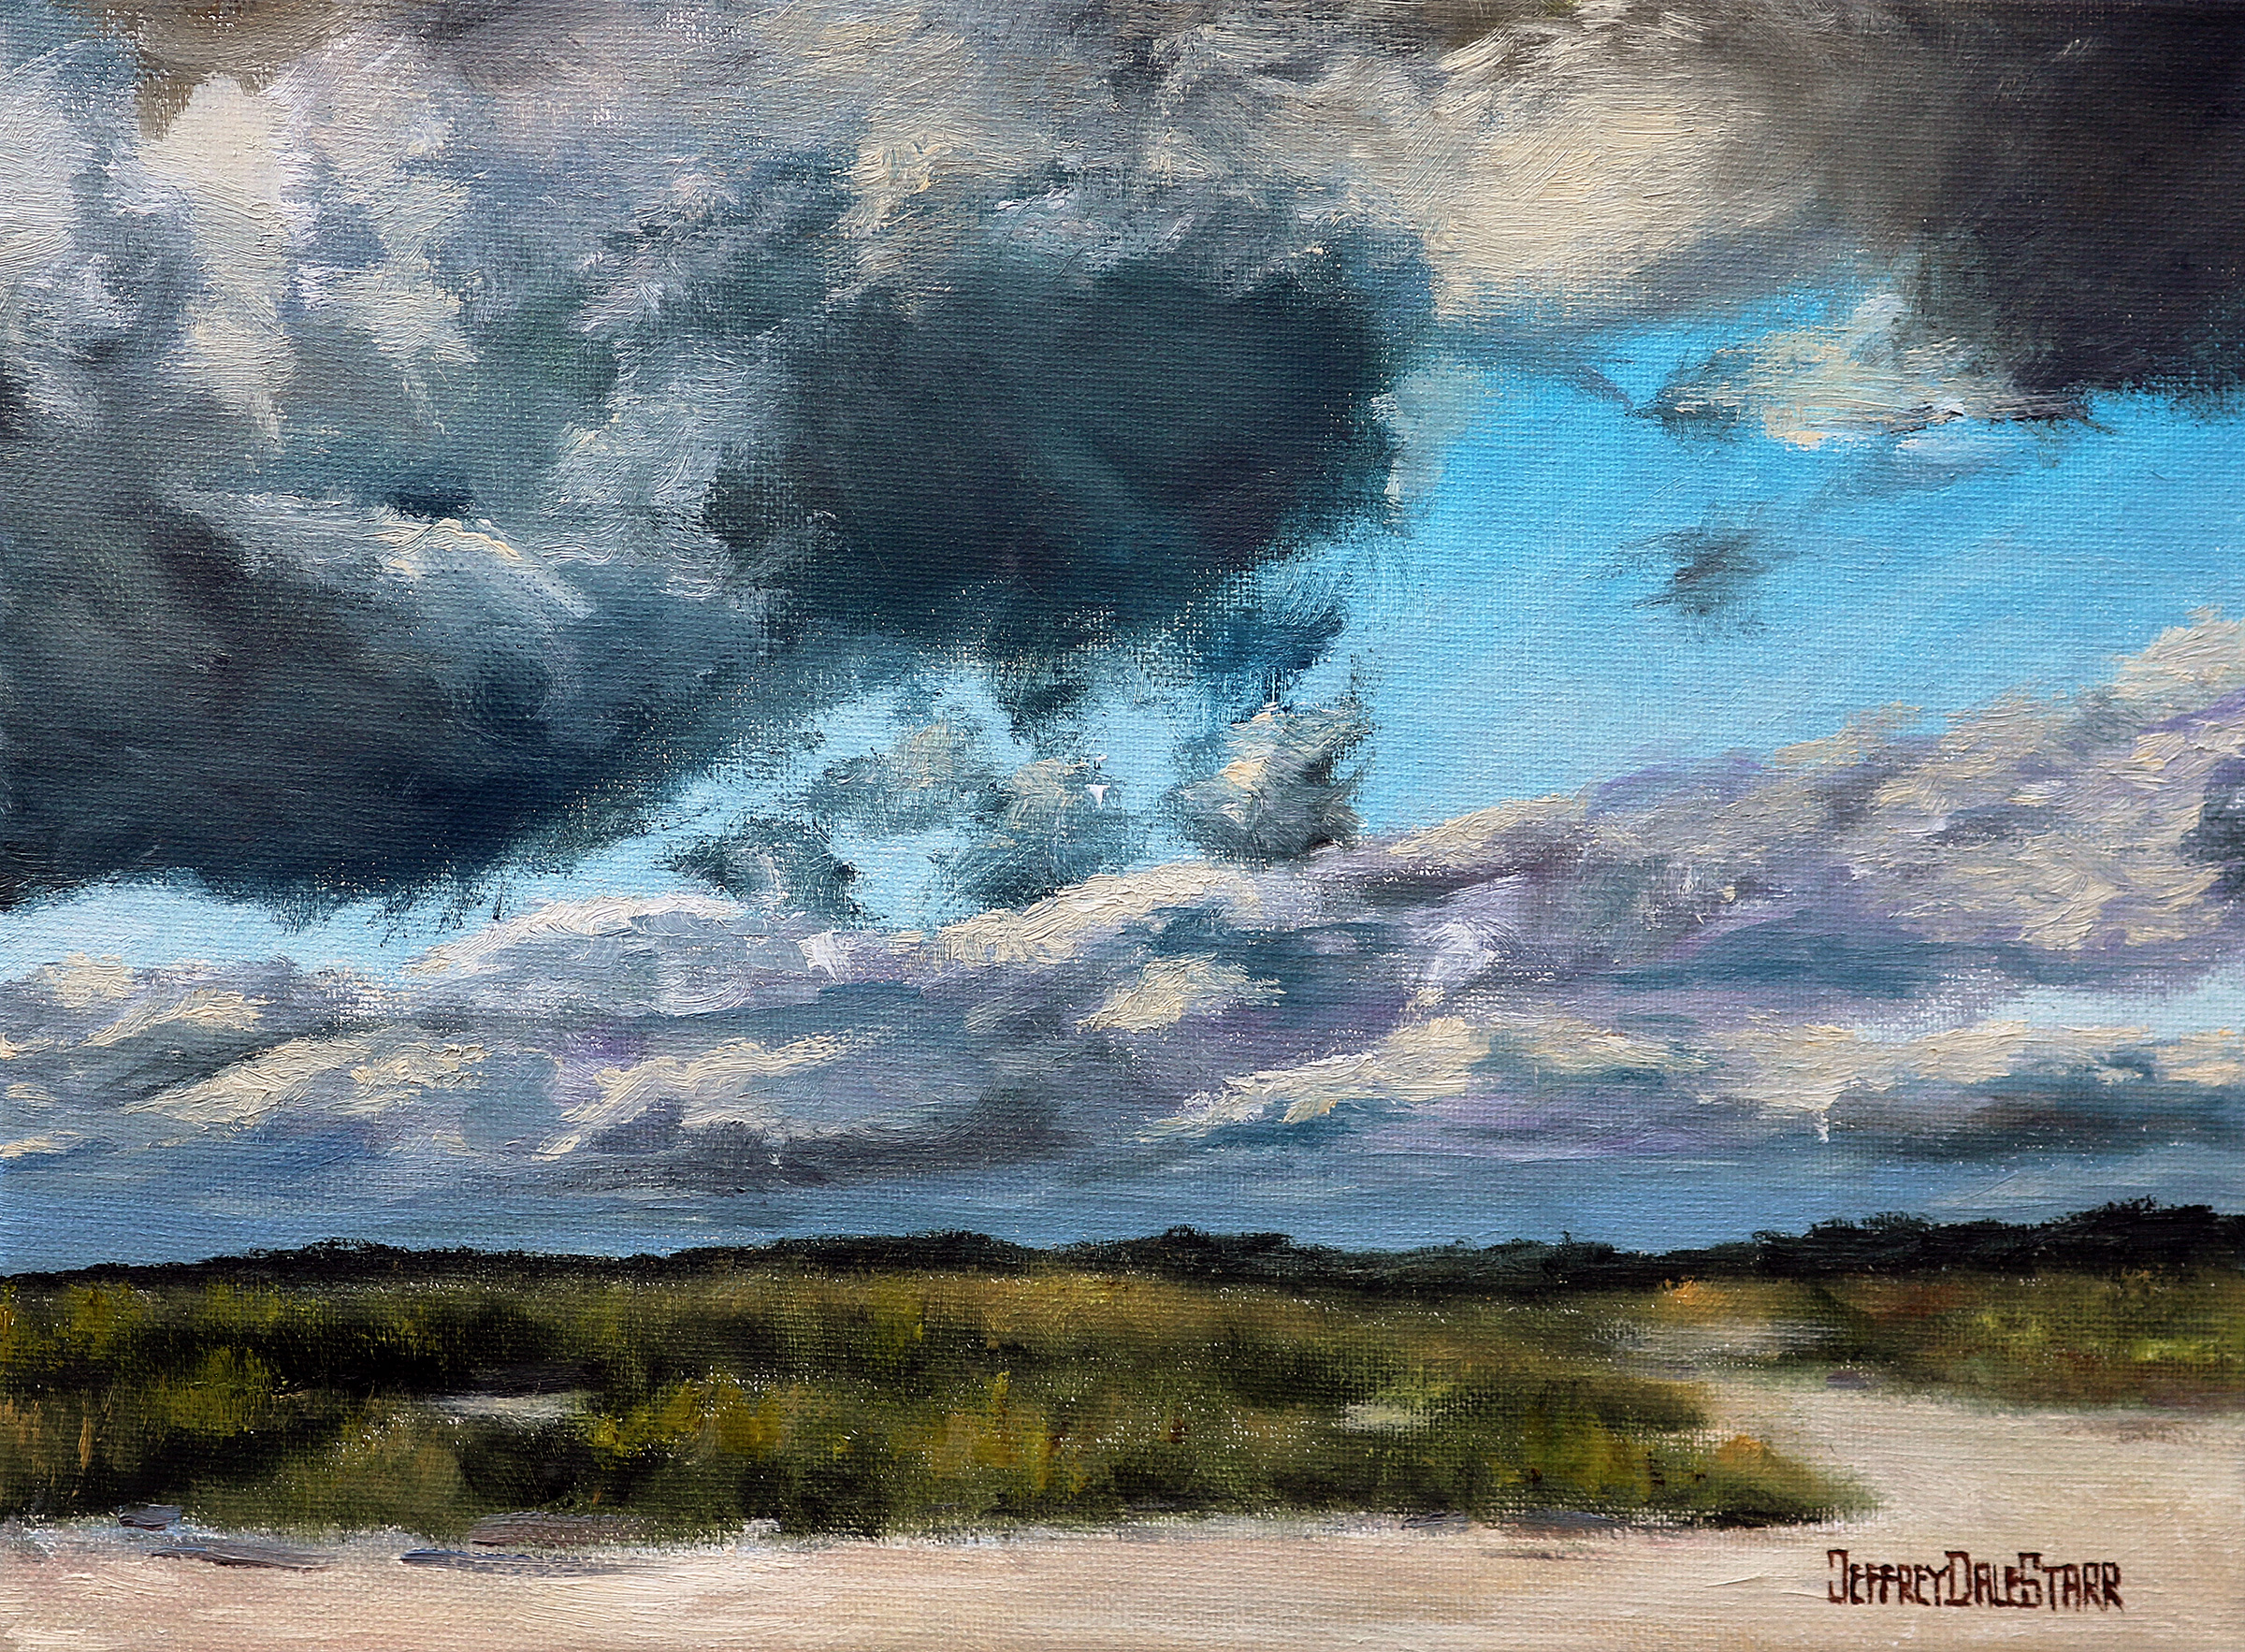 Oil painting "The Storm Rolls Over the Beach" by Jeffrey Dale Starr